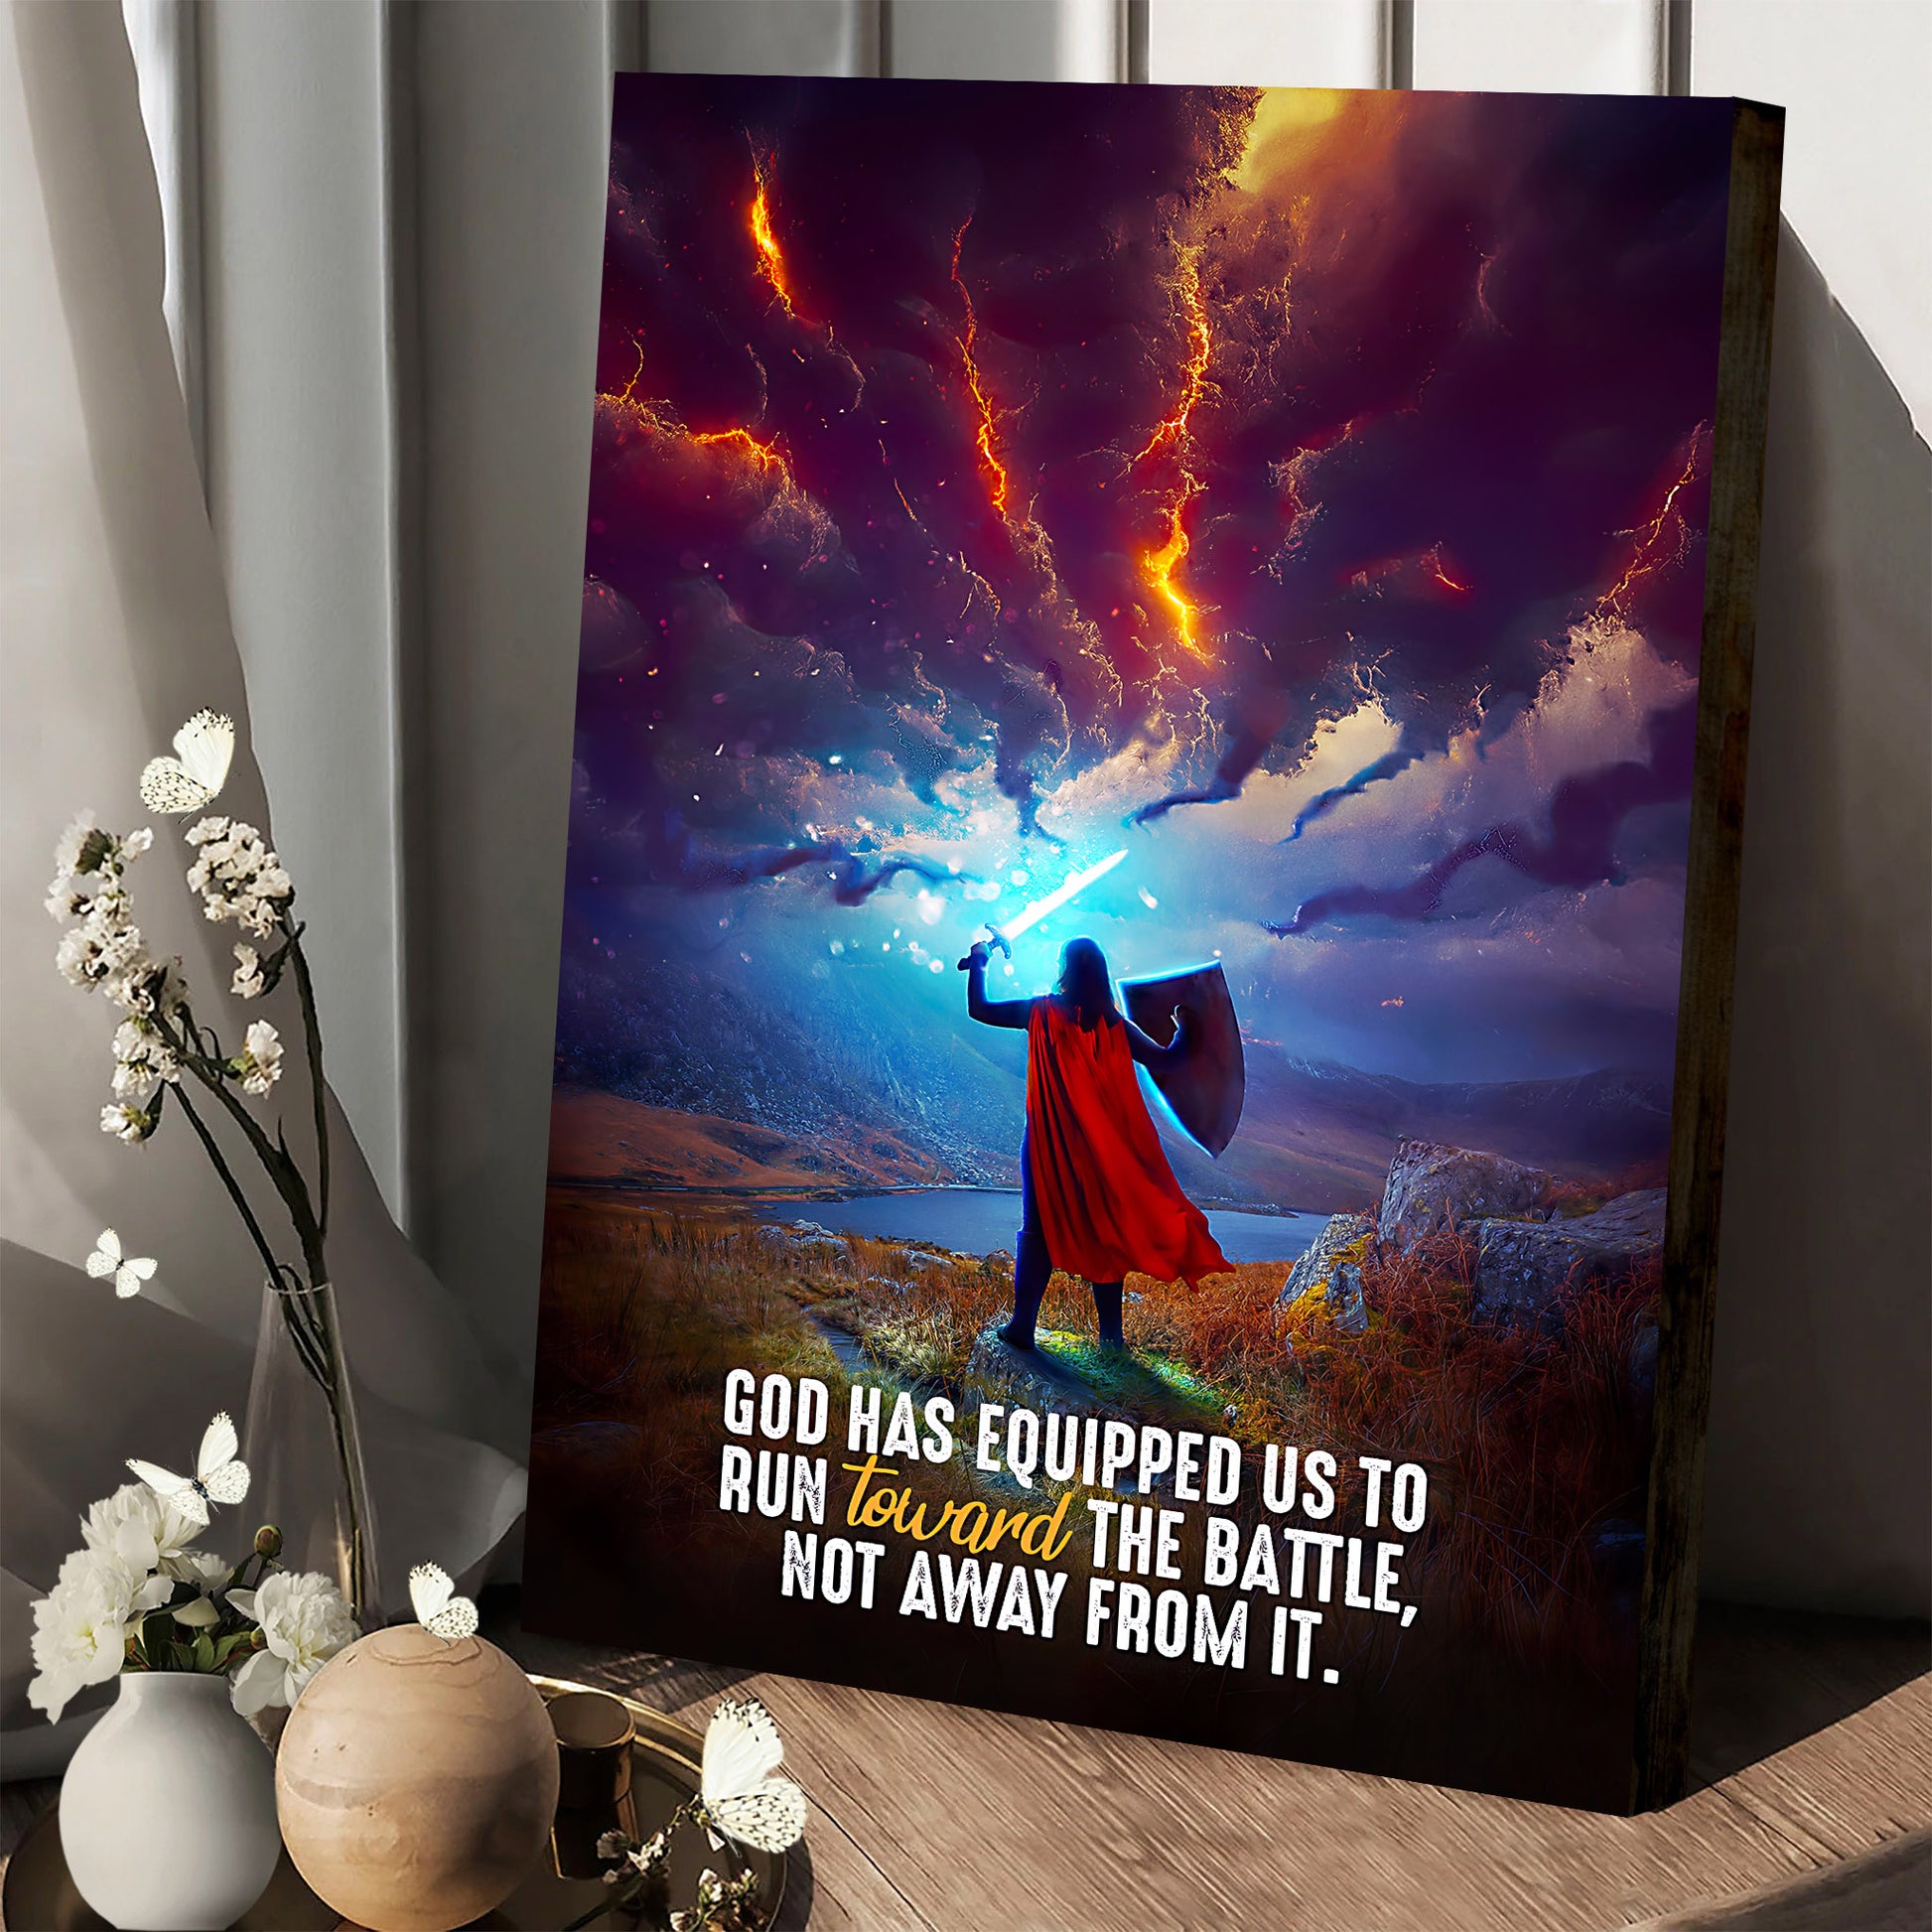 God Has Equipped Us To Run Toward The Battle, Not Away From It Canvas Wall Art Decor